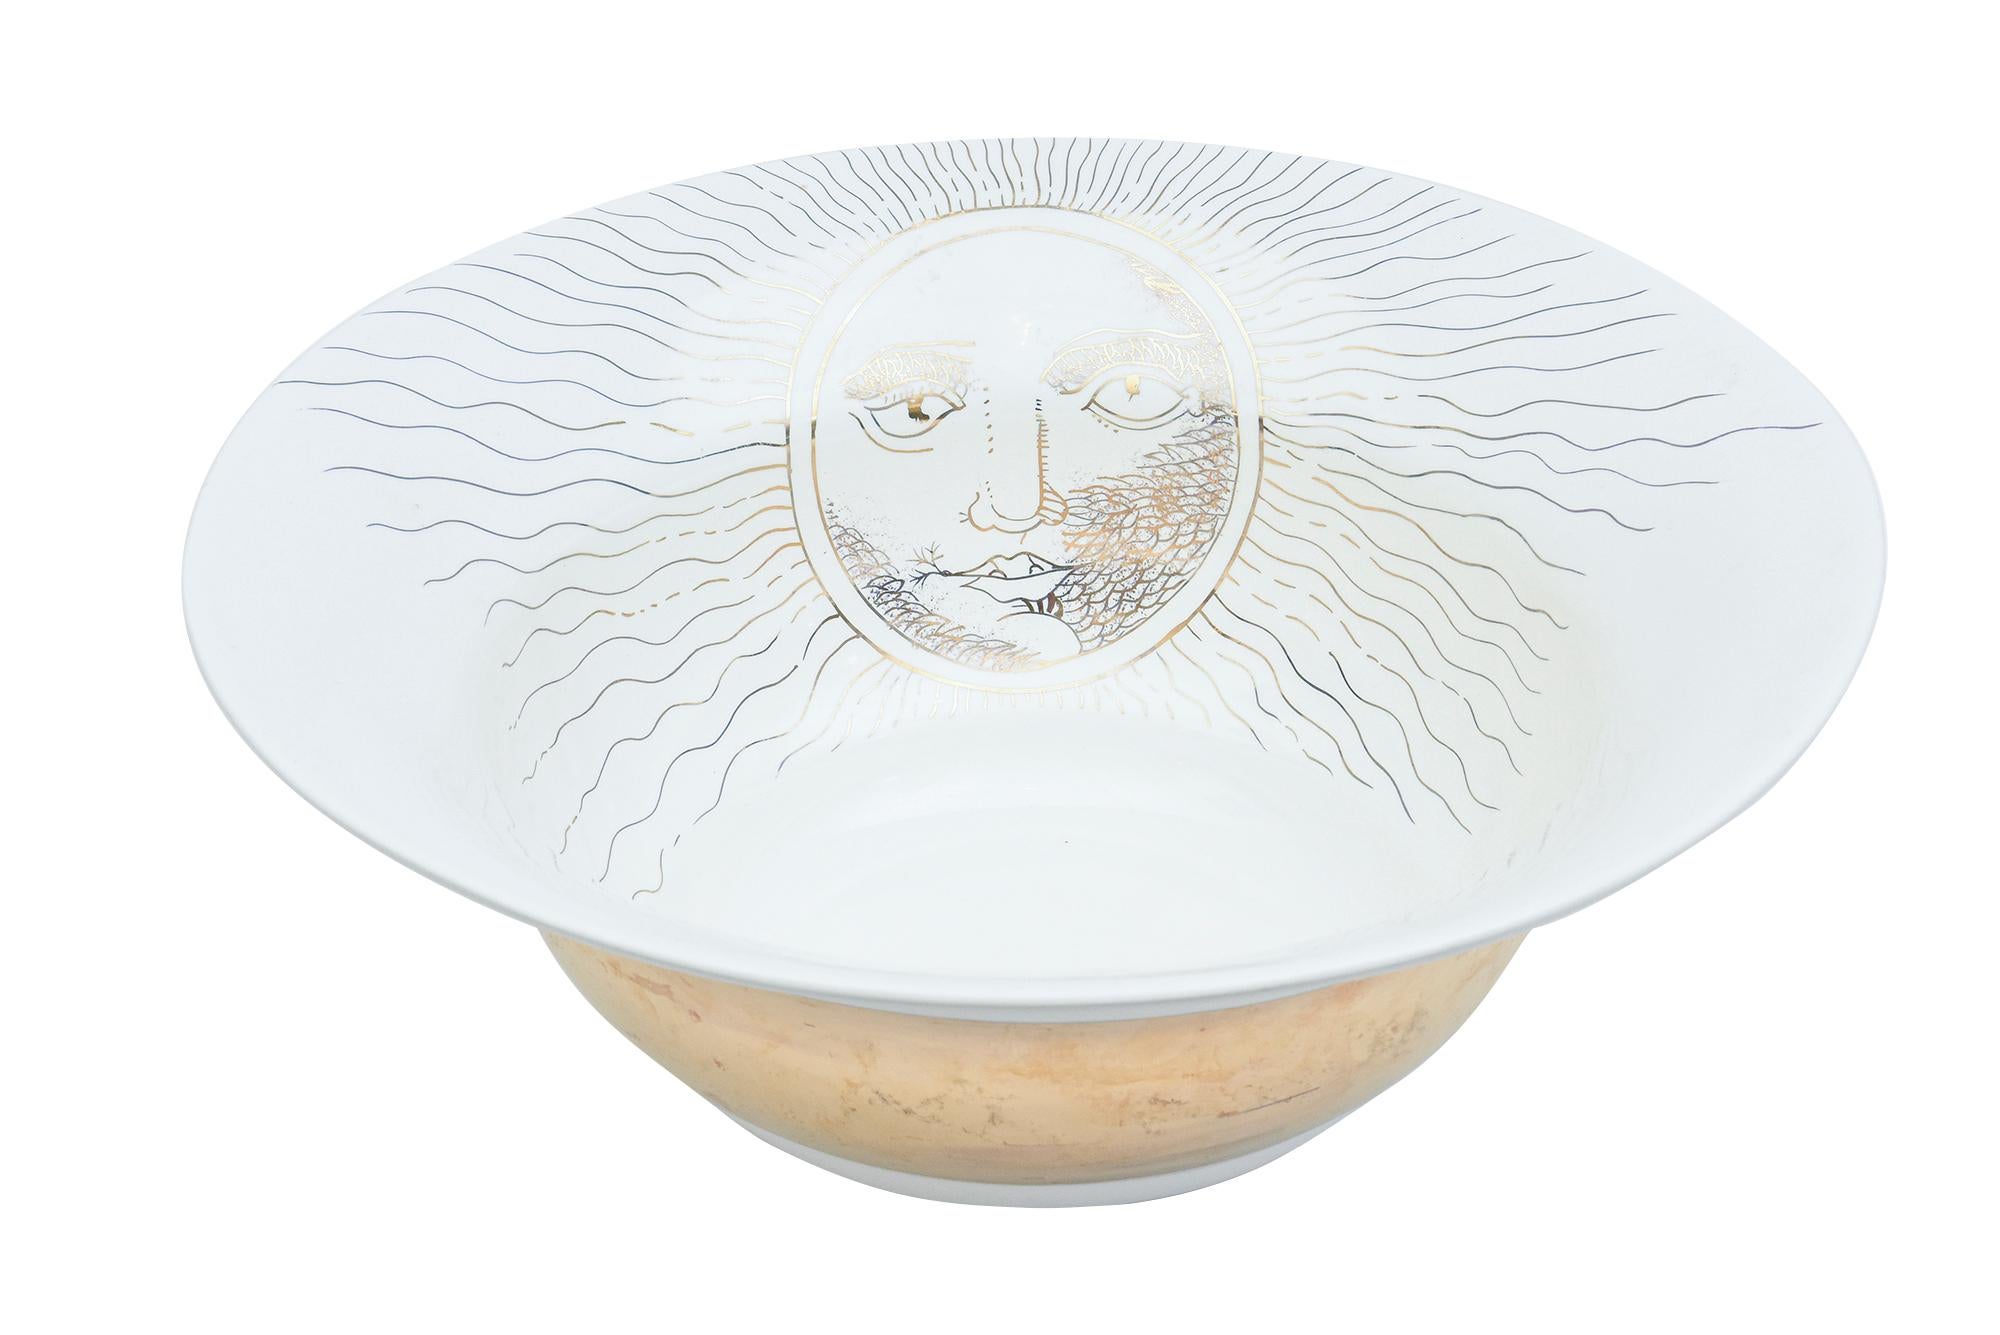 This very large ceramic bowl has the influence of Piero Fornasetti in the sun motif face.
It is signed on the bottom Laurie Gatea Los Angeles Pottery. From the 90's.
The gold banding surrounds the exterior. It must be hand washed.